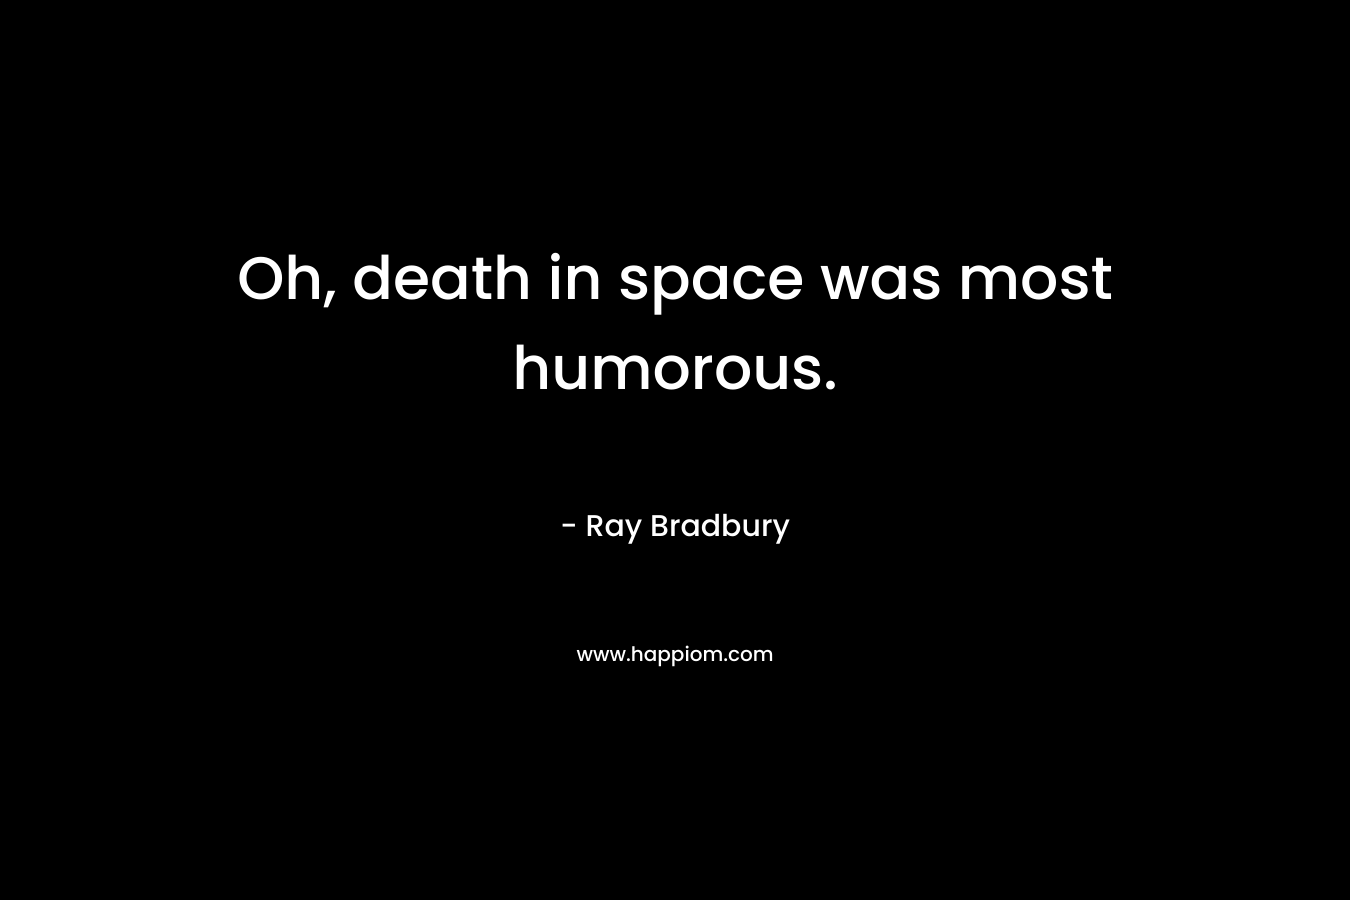 Oh, death in space was most humorous.